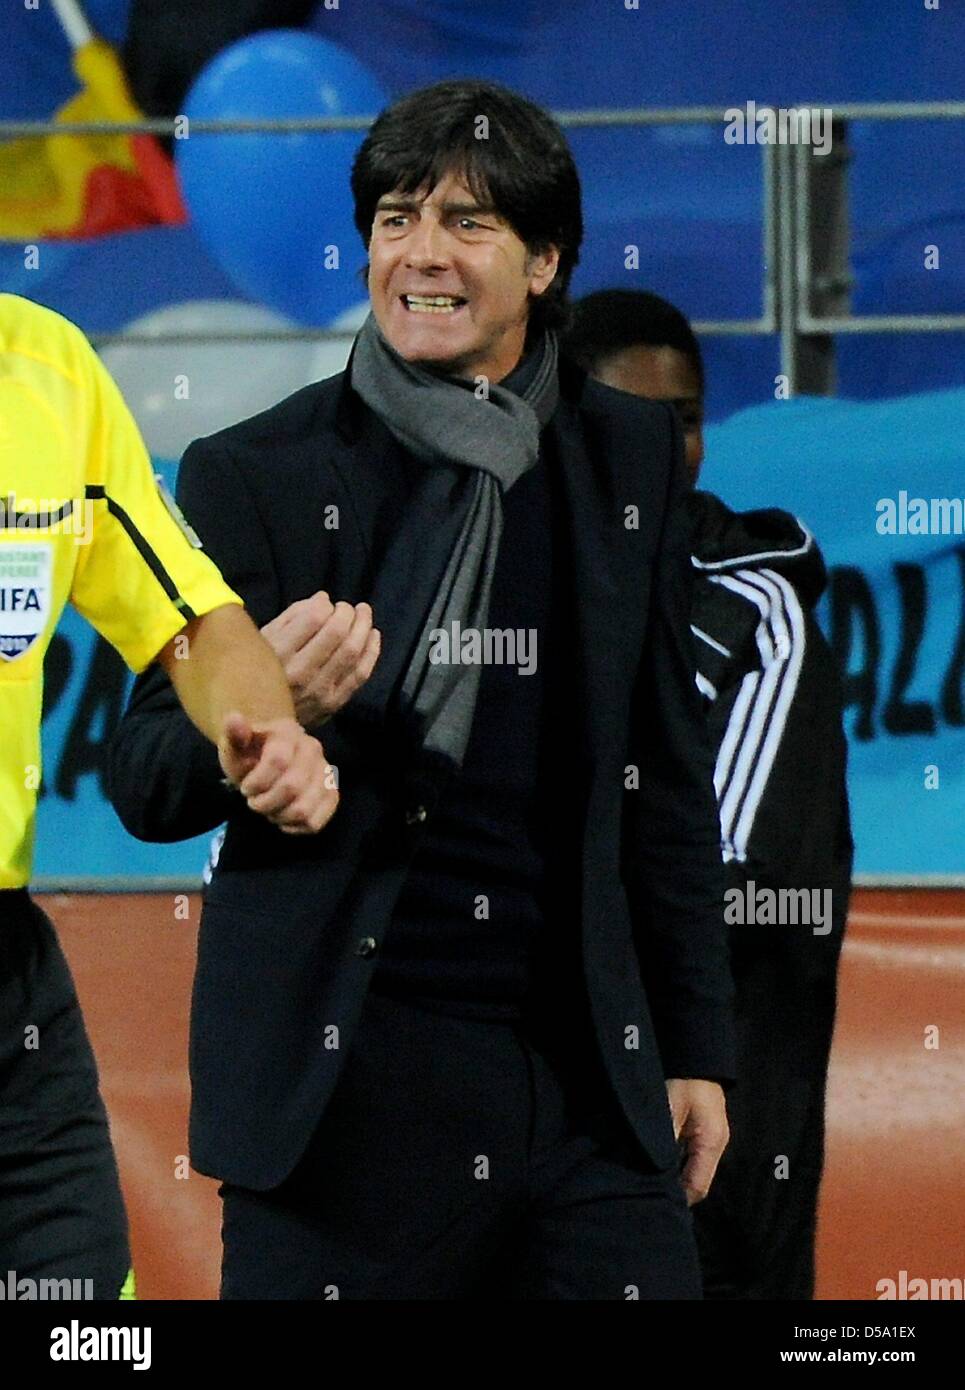 German coach Joachim Loew gestures during the 2010 FIFA World Cup third place match between Uruguay and Germany at the Nelson Mandela Bay Stadium in Port Elizabeth, South Africa 10 July 2010. Germany won 3:2. Photo: Marcus Brandt dpa - Please refer to http://dpaq.de/FIFA-WM2010-TC Stock Photo